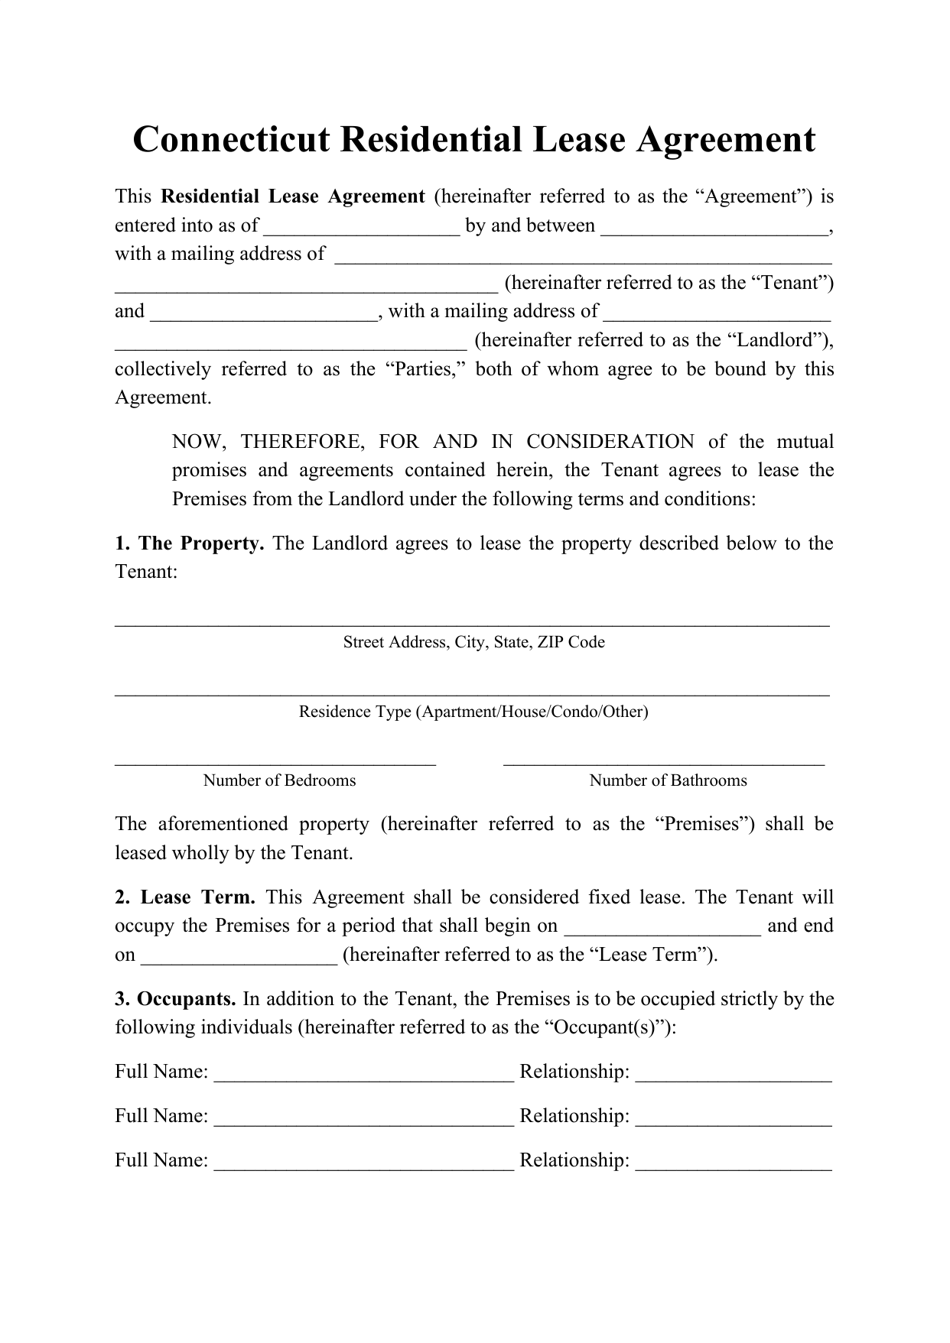 Connecticut Residential Lease Agreement Template Fill Out Sign